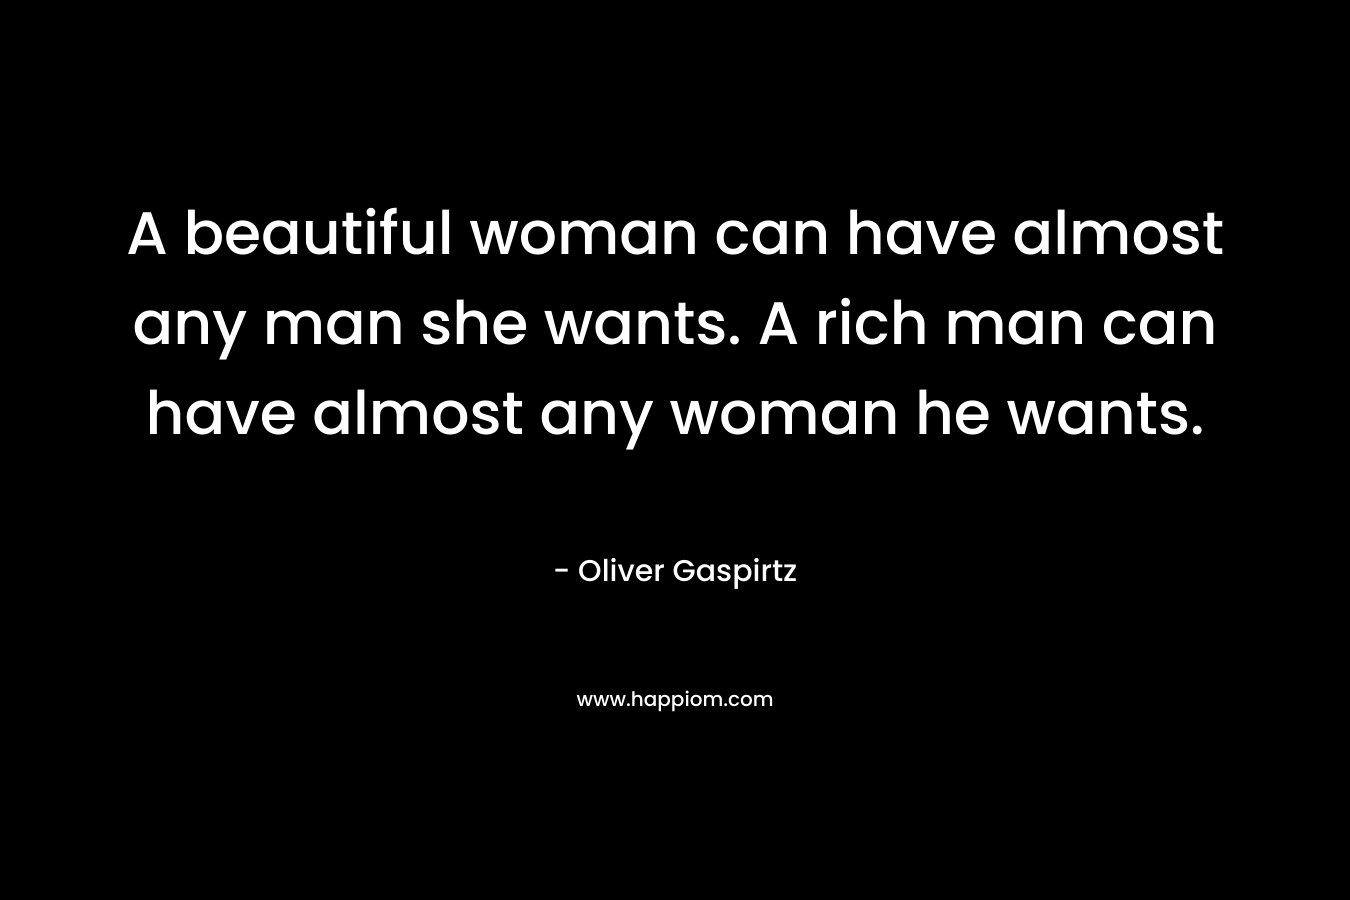 A beautiful woman can have almost any man she wants. A rich man can have almost any woman he wants.